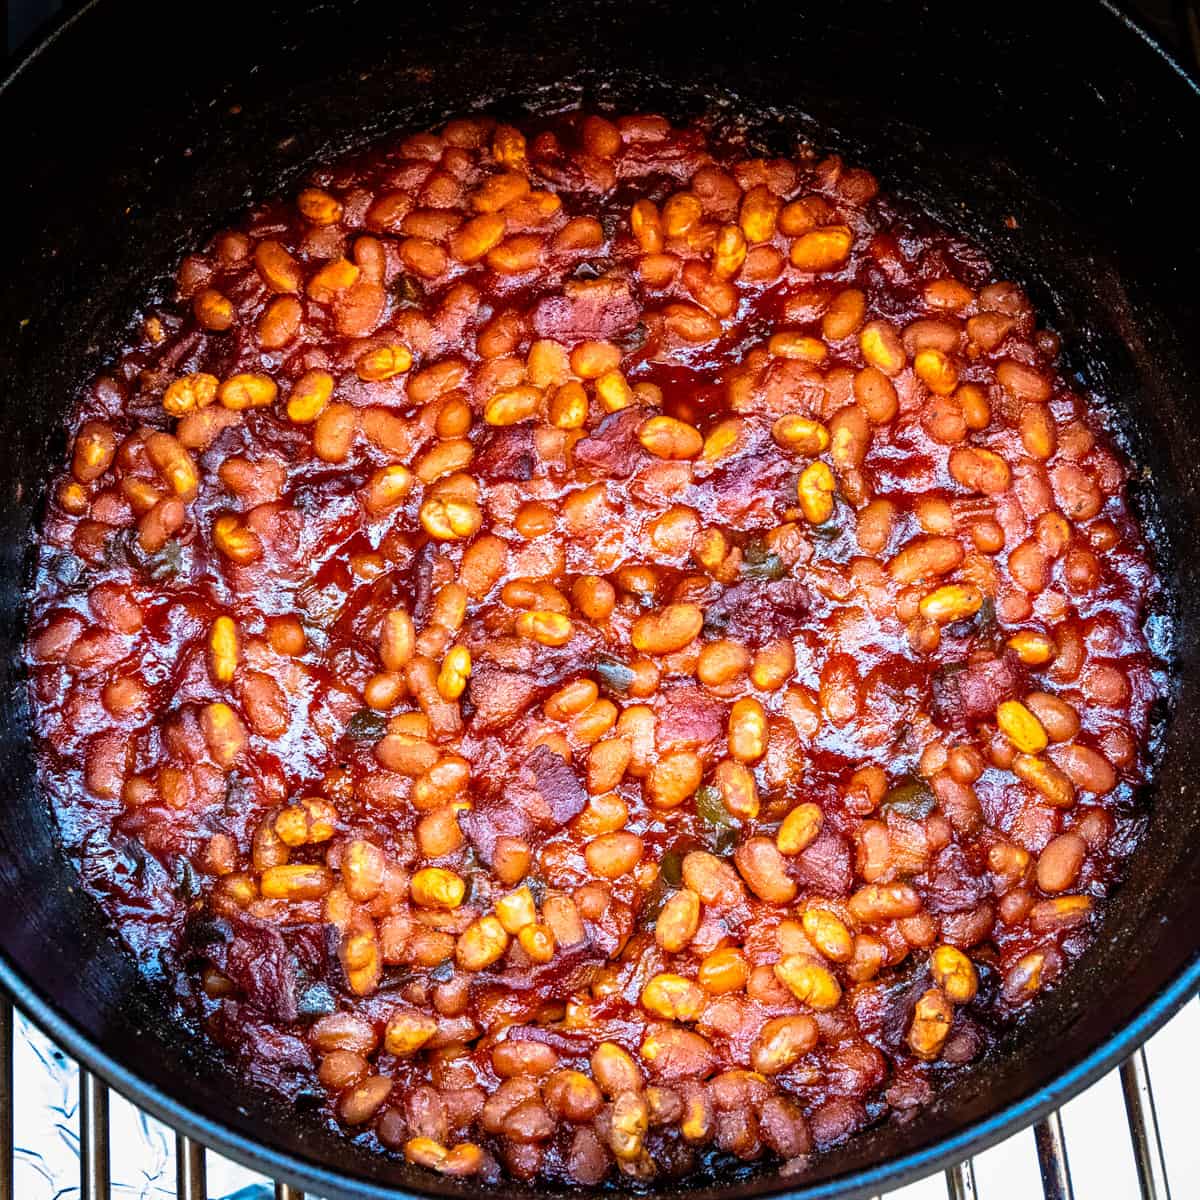 A large pot of smoked baked beans being cooked in a smoker.